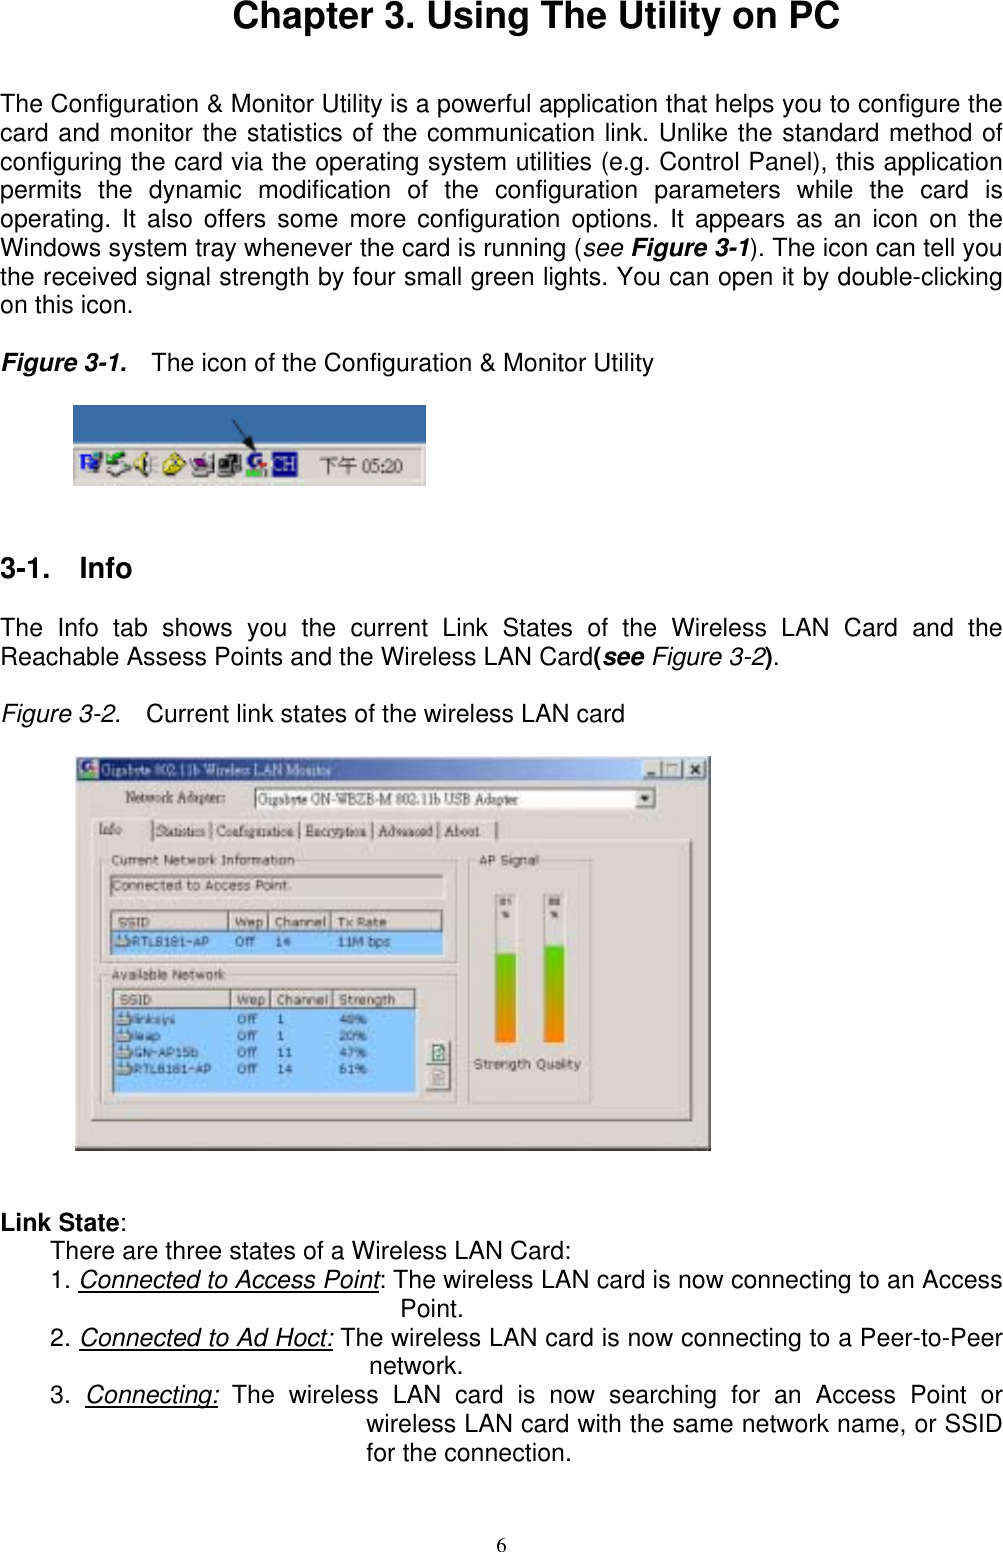 Chapter 3. Using The Utility on PC   The Configuration &amp; Monitor Utility is a powerful application that helps you to configure the card and monitor the statistics of the communication link. Unlike the standard method of configuring the card via the operating system utilities (e.g. Control Panel), this application permits the dynamic modification of the configuration parameters while the card is operating. It also offers some more configuration options. It appears as an icon on the Windows system tray whenever the card is running (see Figure 3-1). The icon can tell you the received signal strength by four small green lights. You can open it by double-clicking on this icon.  Figure 3-1.    The icon of the Configuration &amp; Monitor Utility            3-1.  Info  The Info tab shows you the current Link States of the Wireless LAN Card and the Reachable Assess Points and the Wireless LAN Card(see Figure 3-2).    Figure 3-2.    Current link states of the wireless LAN card            Link State:  There are three states of a Wireless LAN Card: 1. Connected to Access Point: The wireless LAN card is now connecting to an Access Point. 2. Connected to Ad Hoct: The wireless LAN card is now connecting to a Peer-to-Peer network. 3.  Connecting: The wireless LAN card is now searching for an Access Point or wireless LAN card with the same network name, or SSID for the connection.   6 